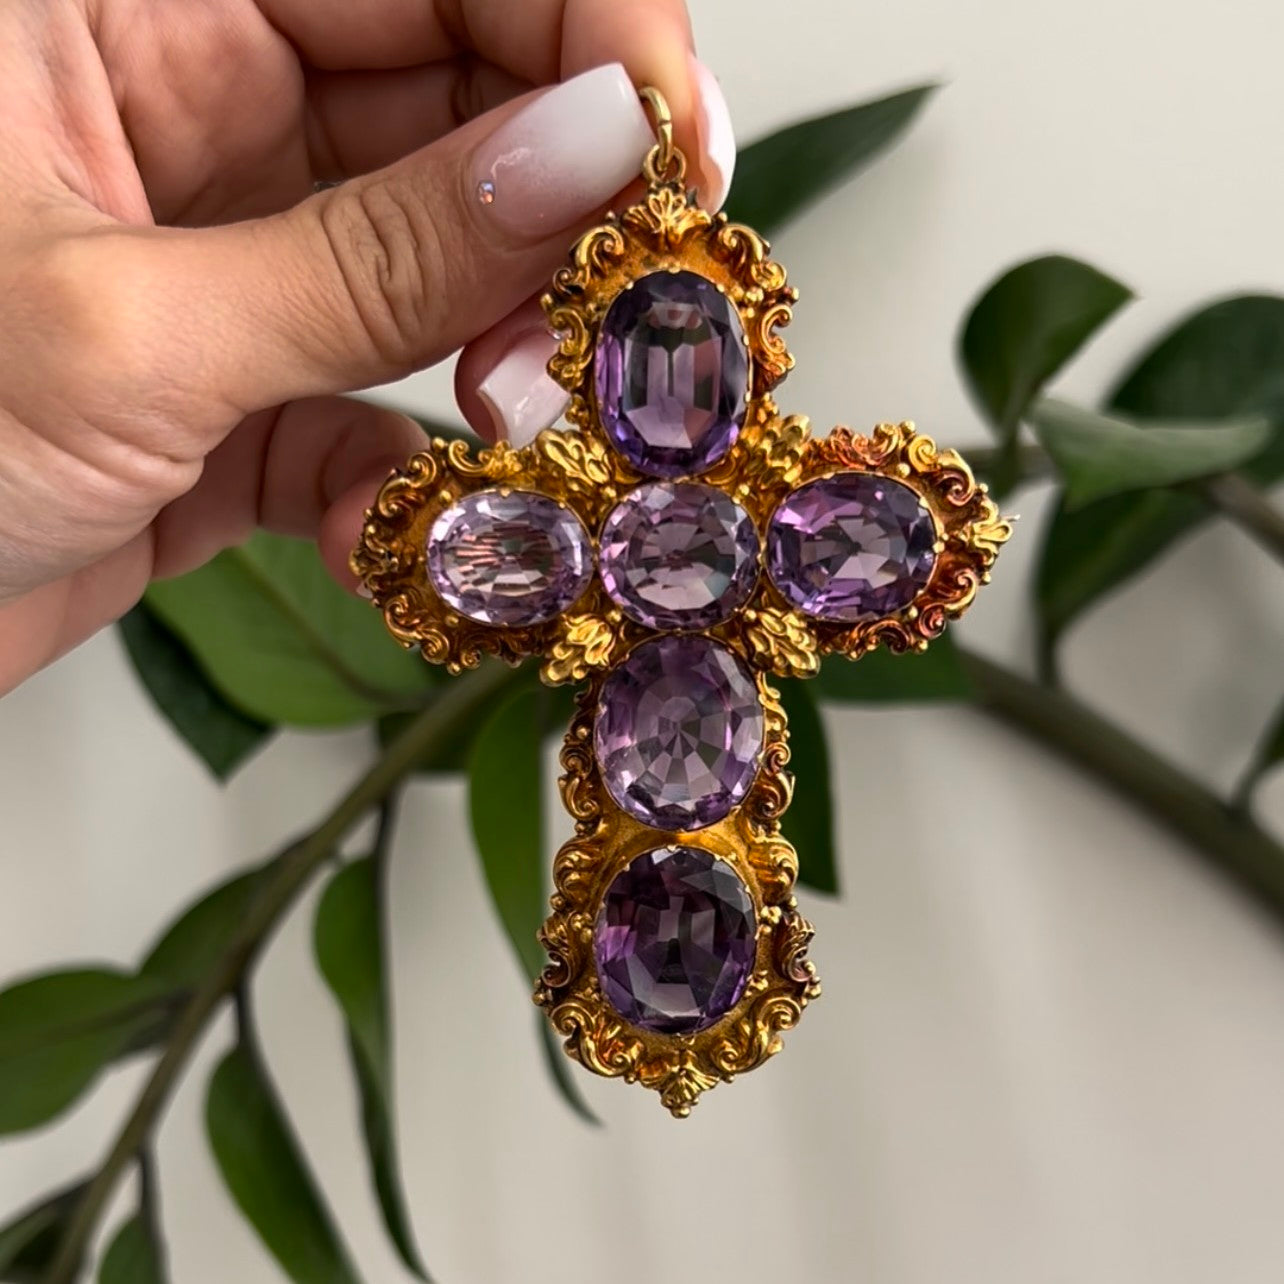 Victorian 15KT Yellow Gold Amethyst Cross Pendant Brooch front view